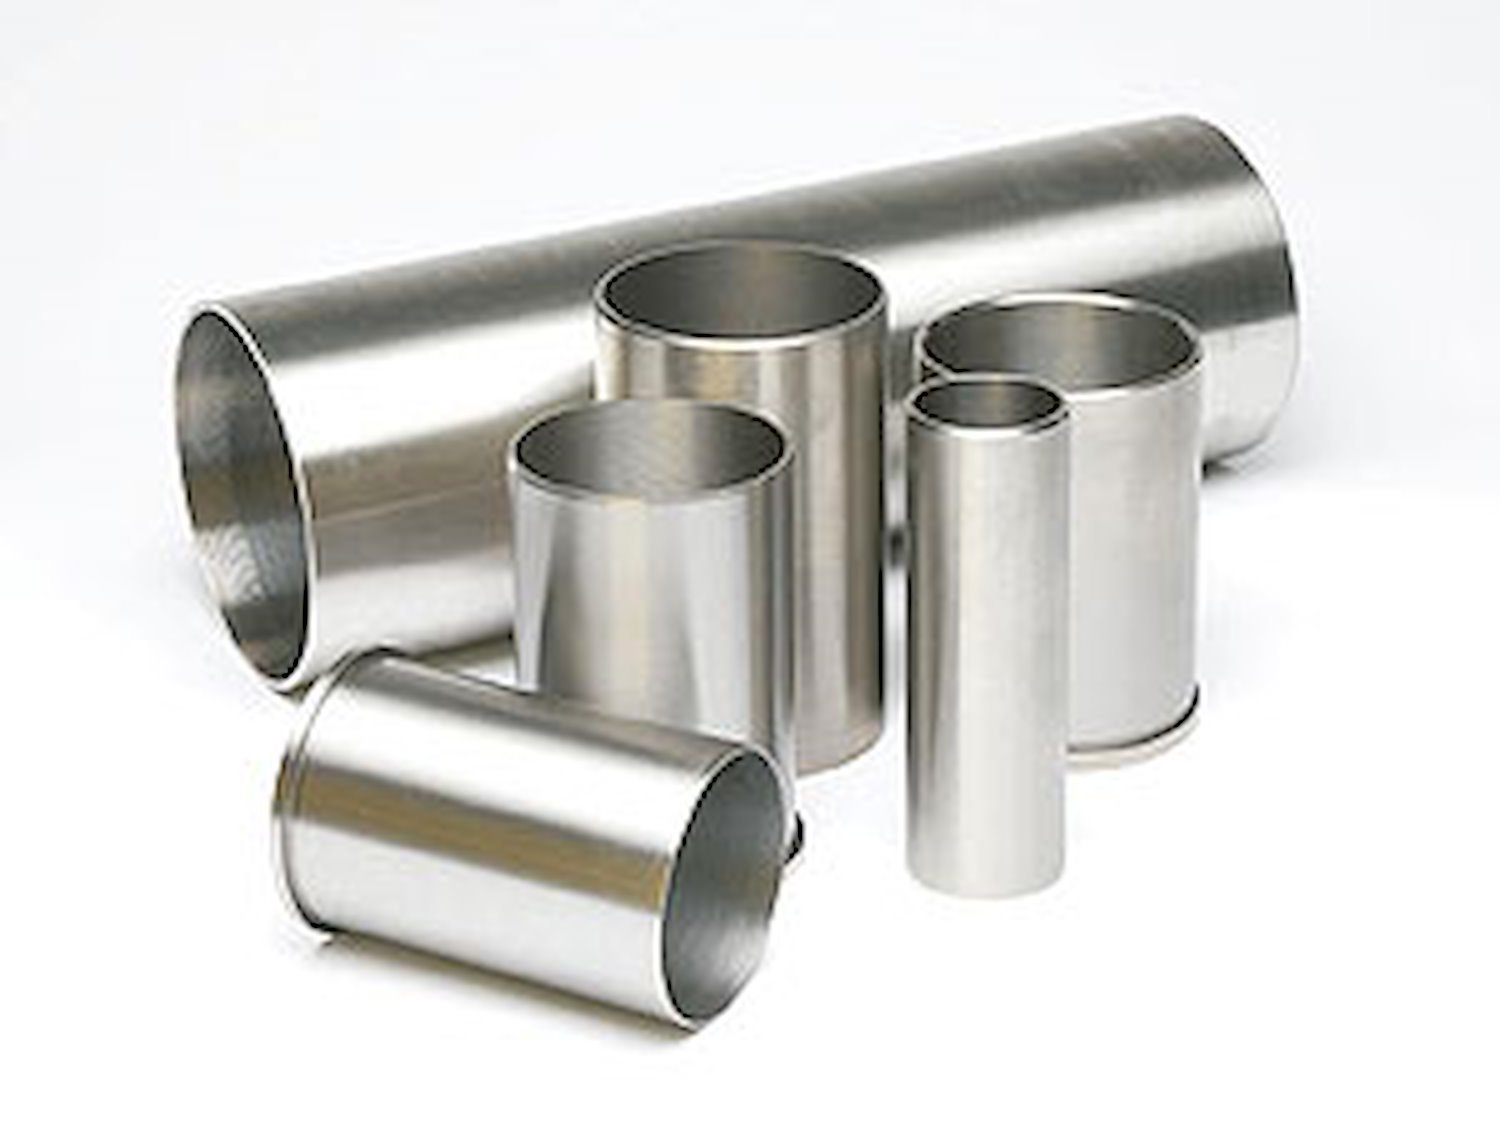 Cylinder Sleeve Bore: 3.1500" Length: 6-1/4" Wall Thickness: 1/8"